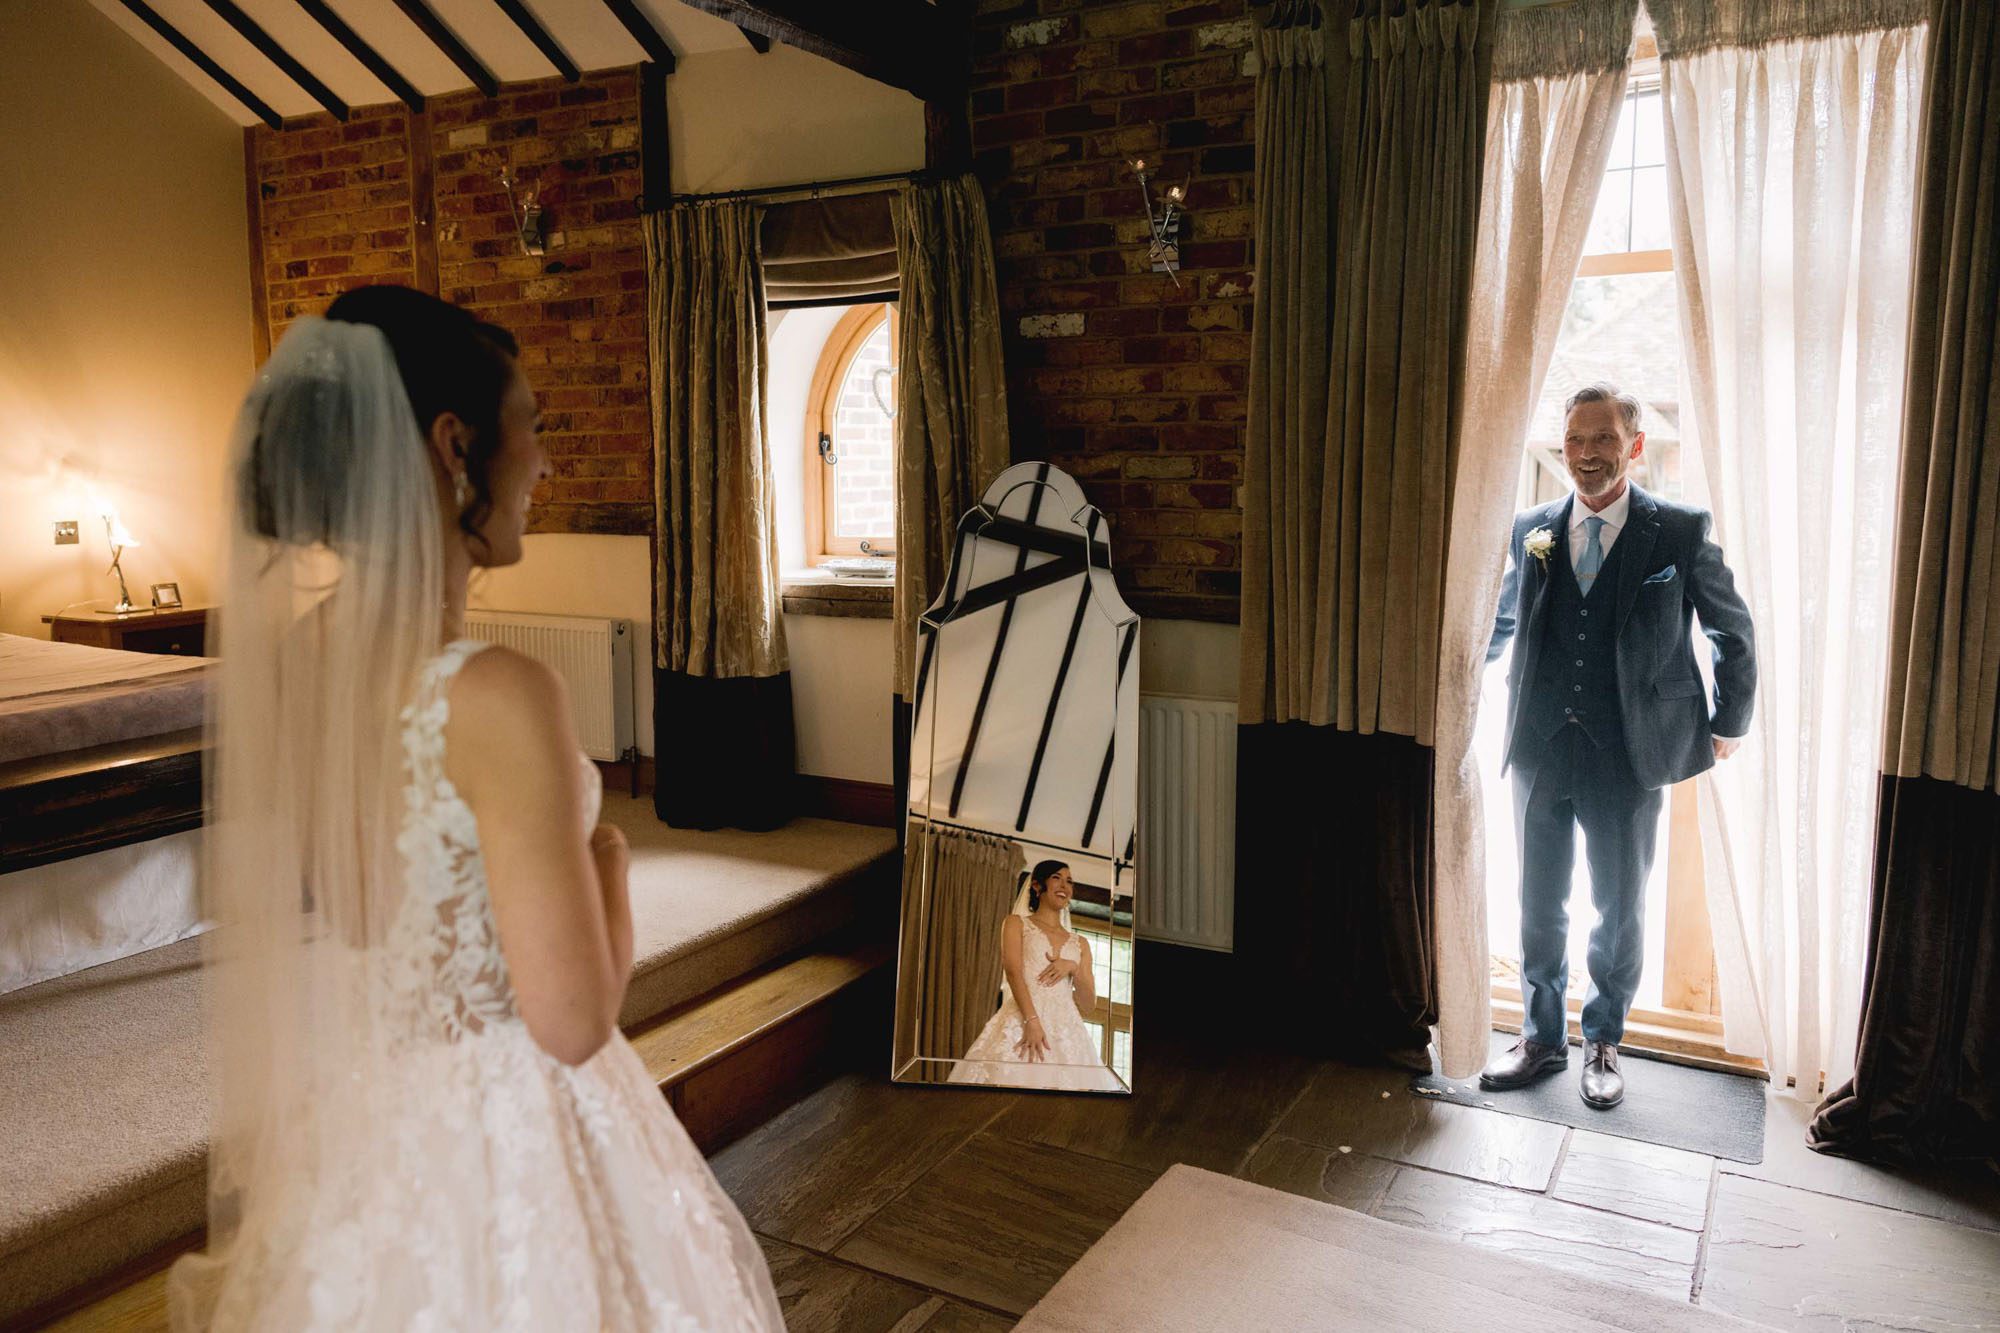 First look between the father of the bride and his daughter at Rivervale Barn in Hampshire.